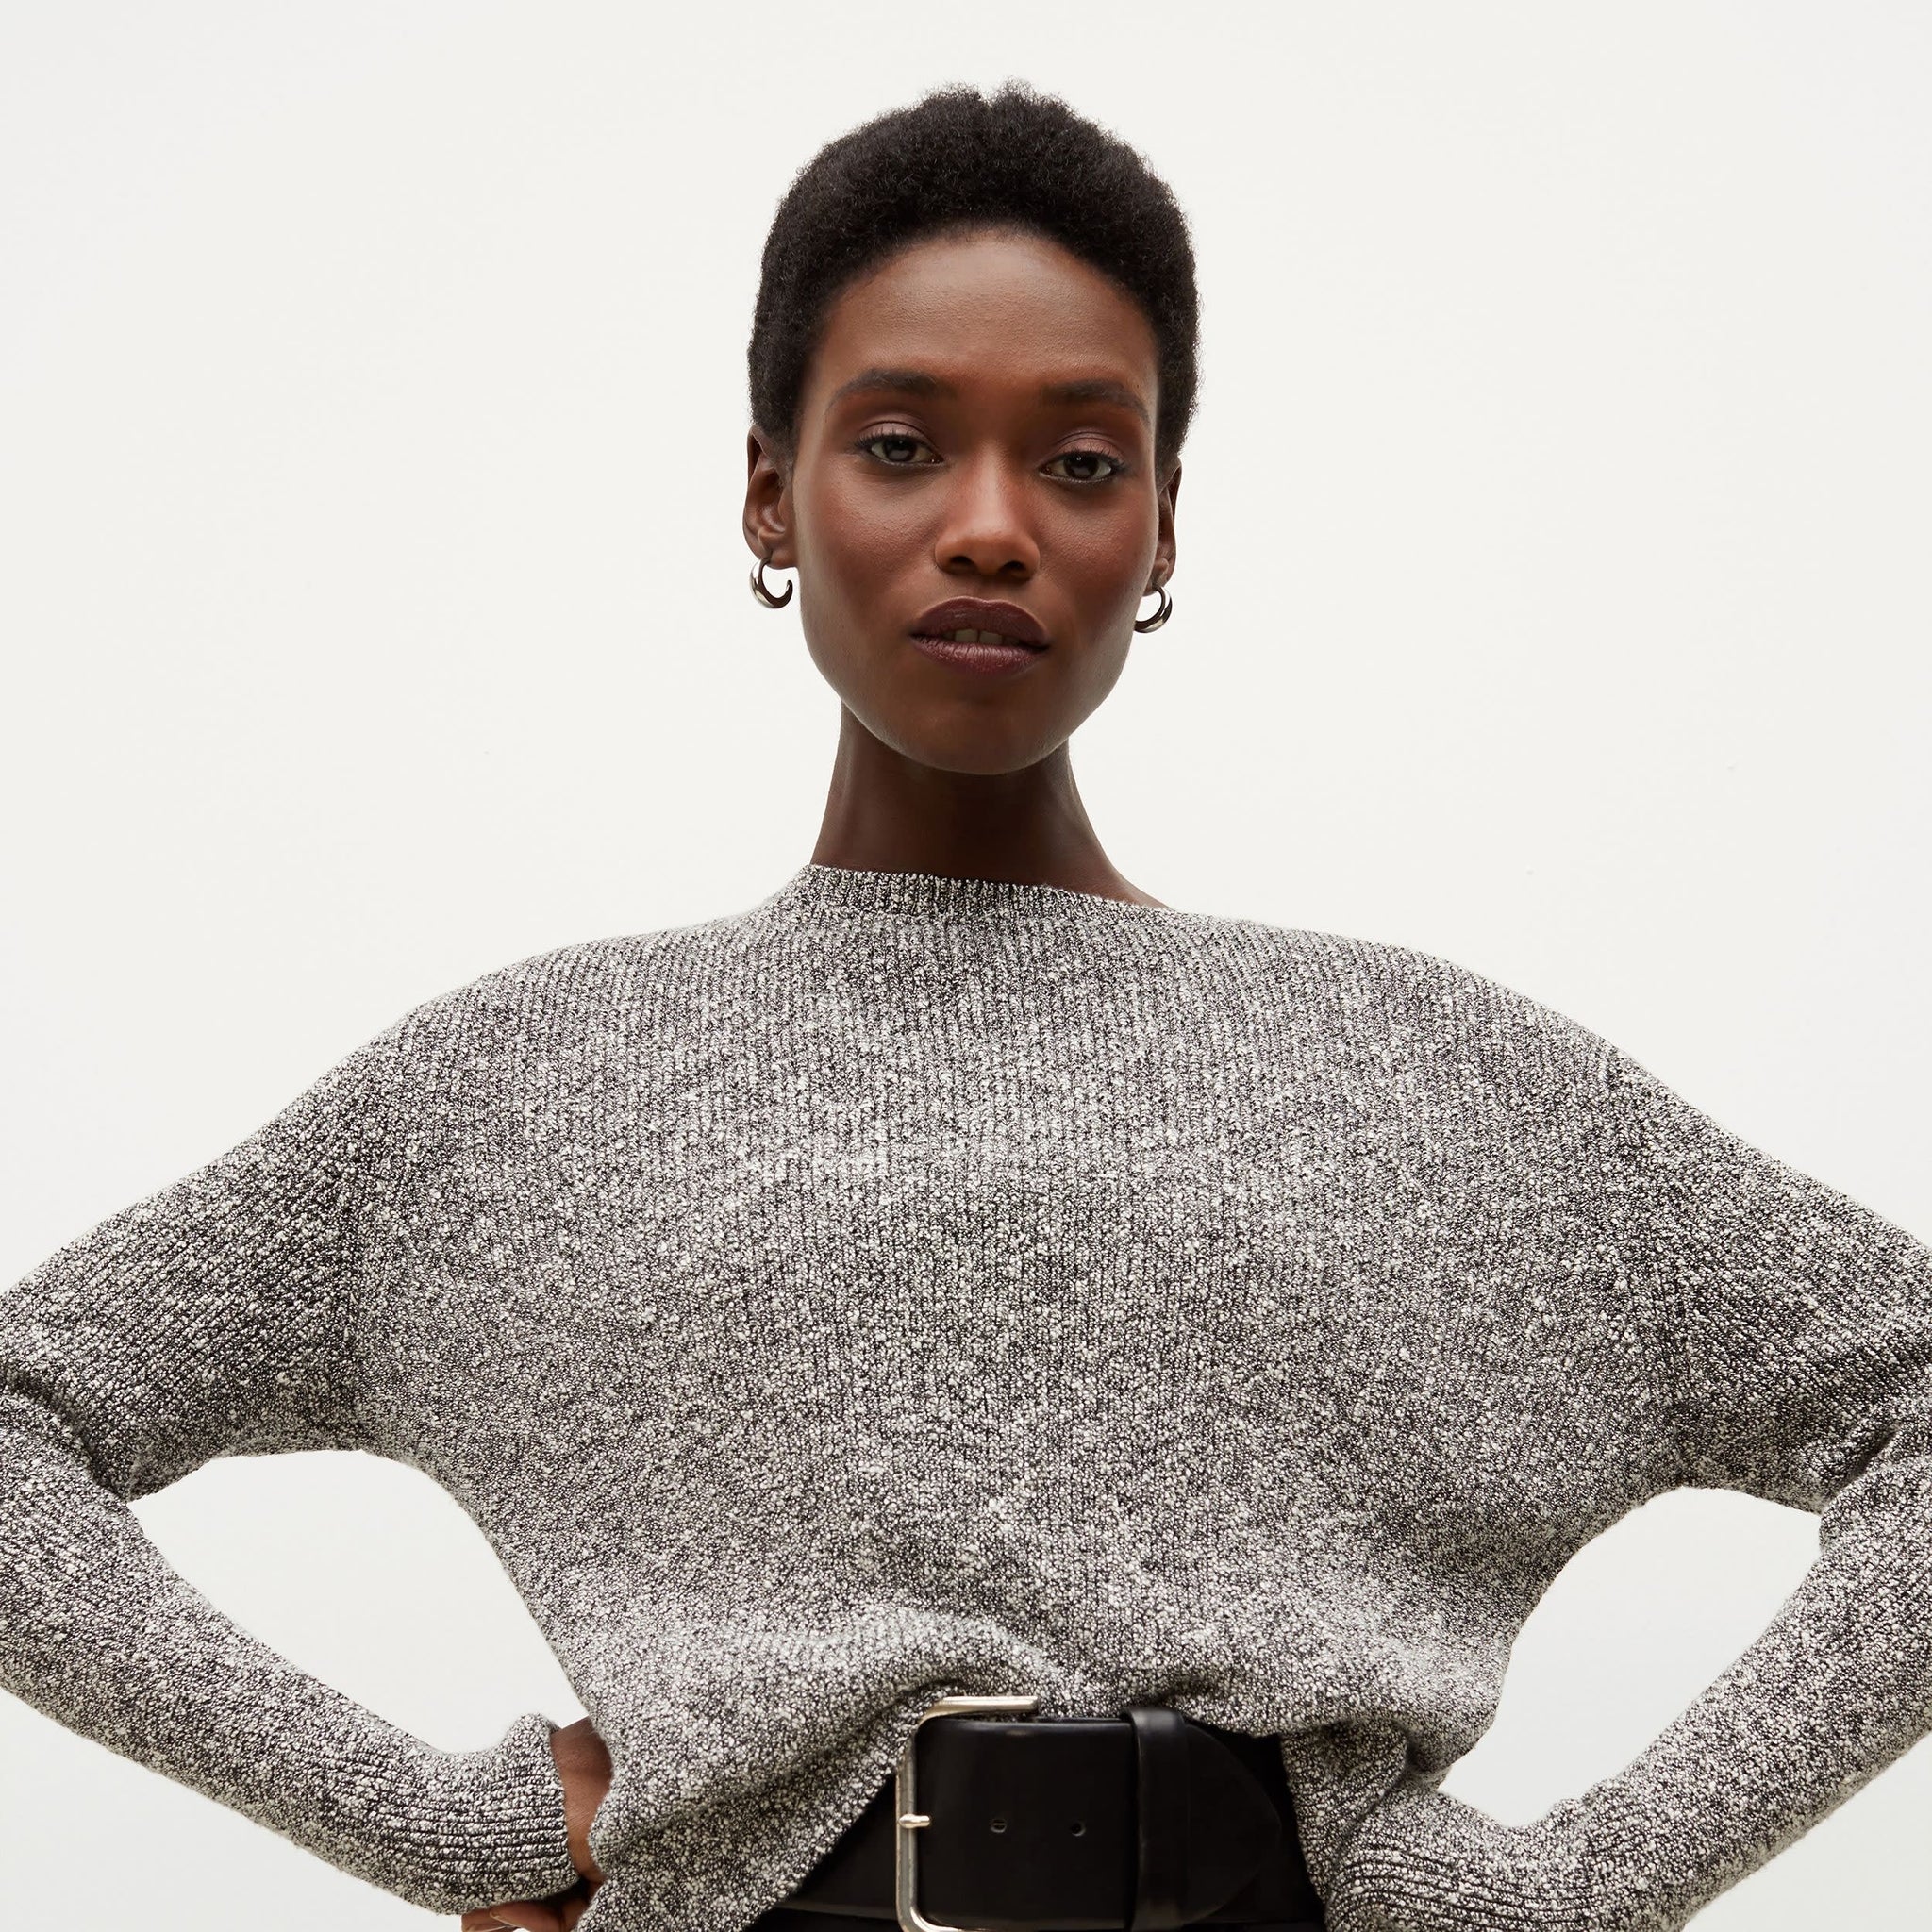 Detail image of a woman standing wearing the Butler Sweater—Knit Boucle in Black / White